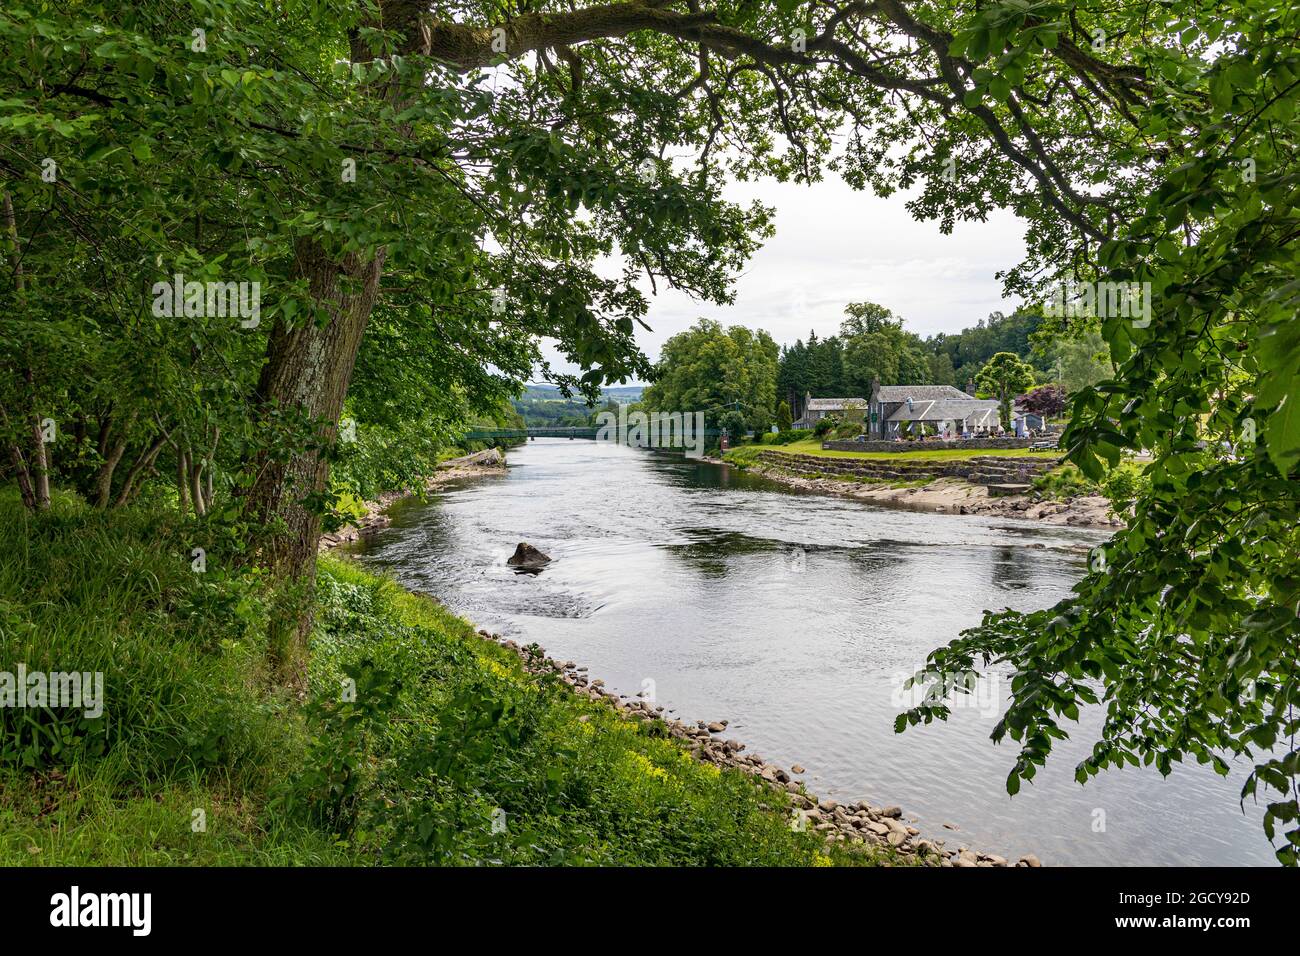 River Tummel at Pitlochry.   The Tummel hydro-electric power scheme is an interconnected network of dams, power stations, aqueducts and electric power. Stock Photo